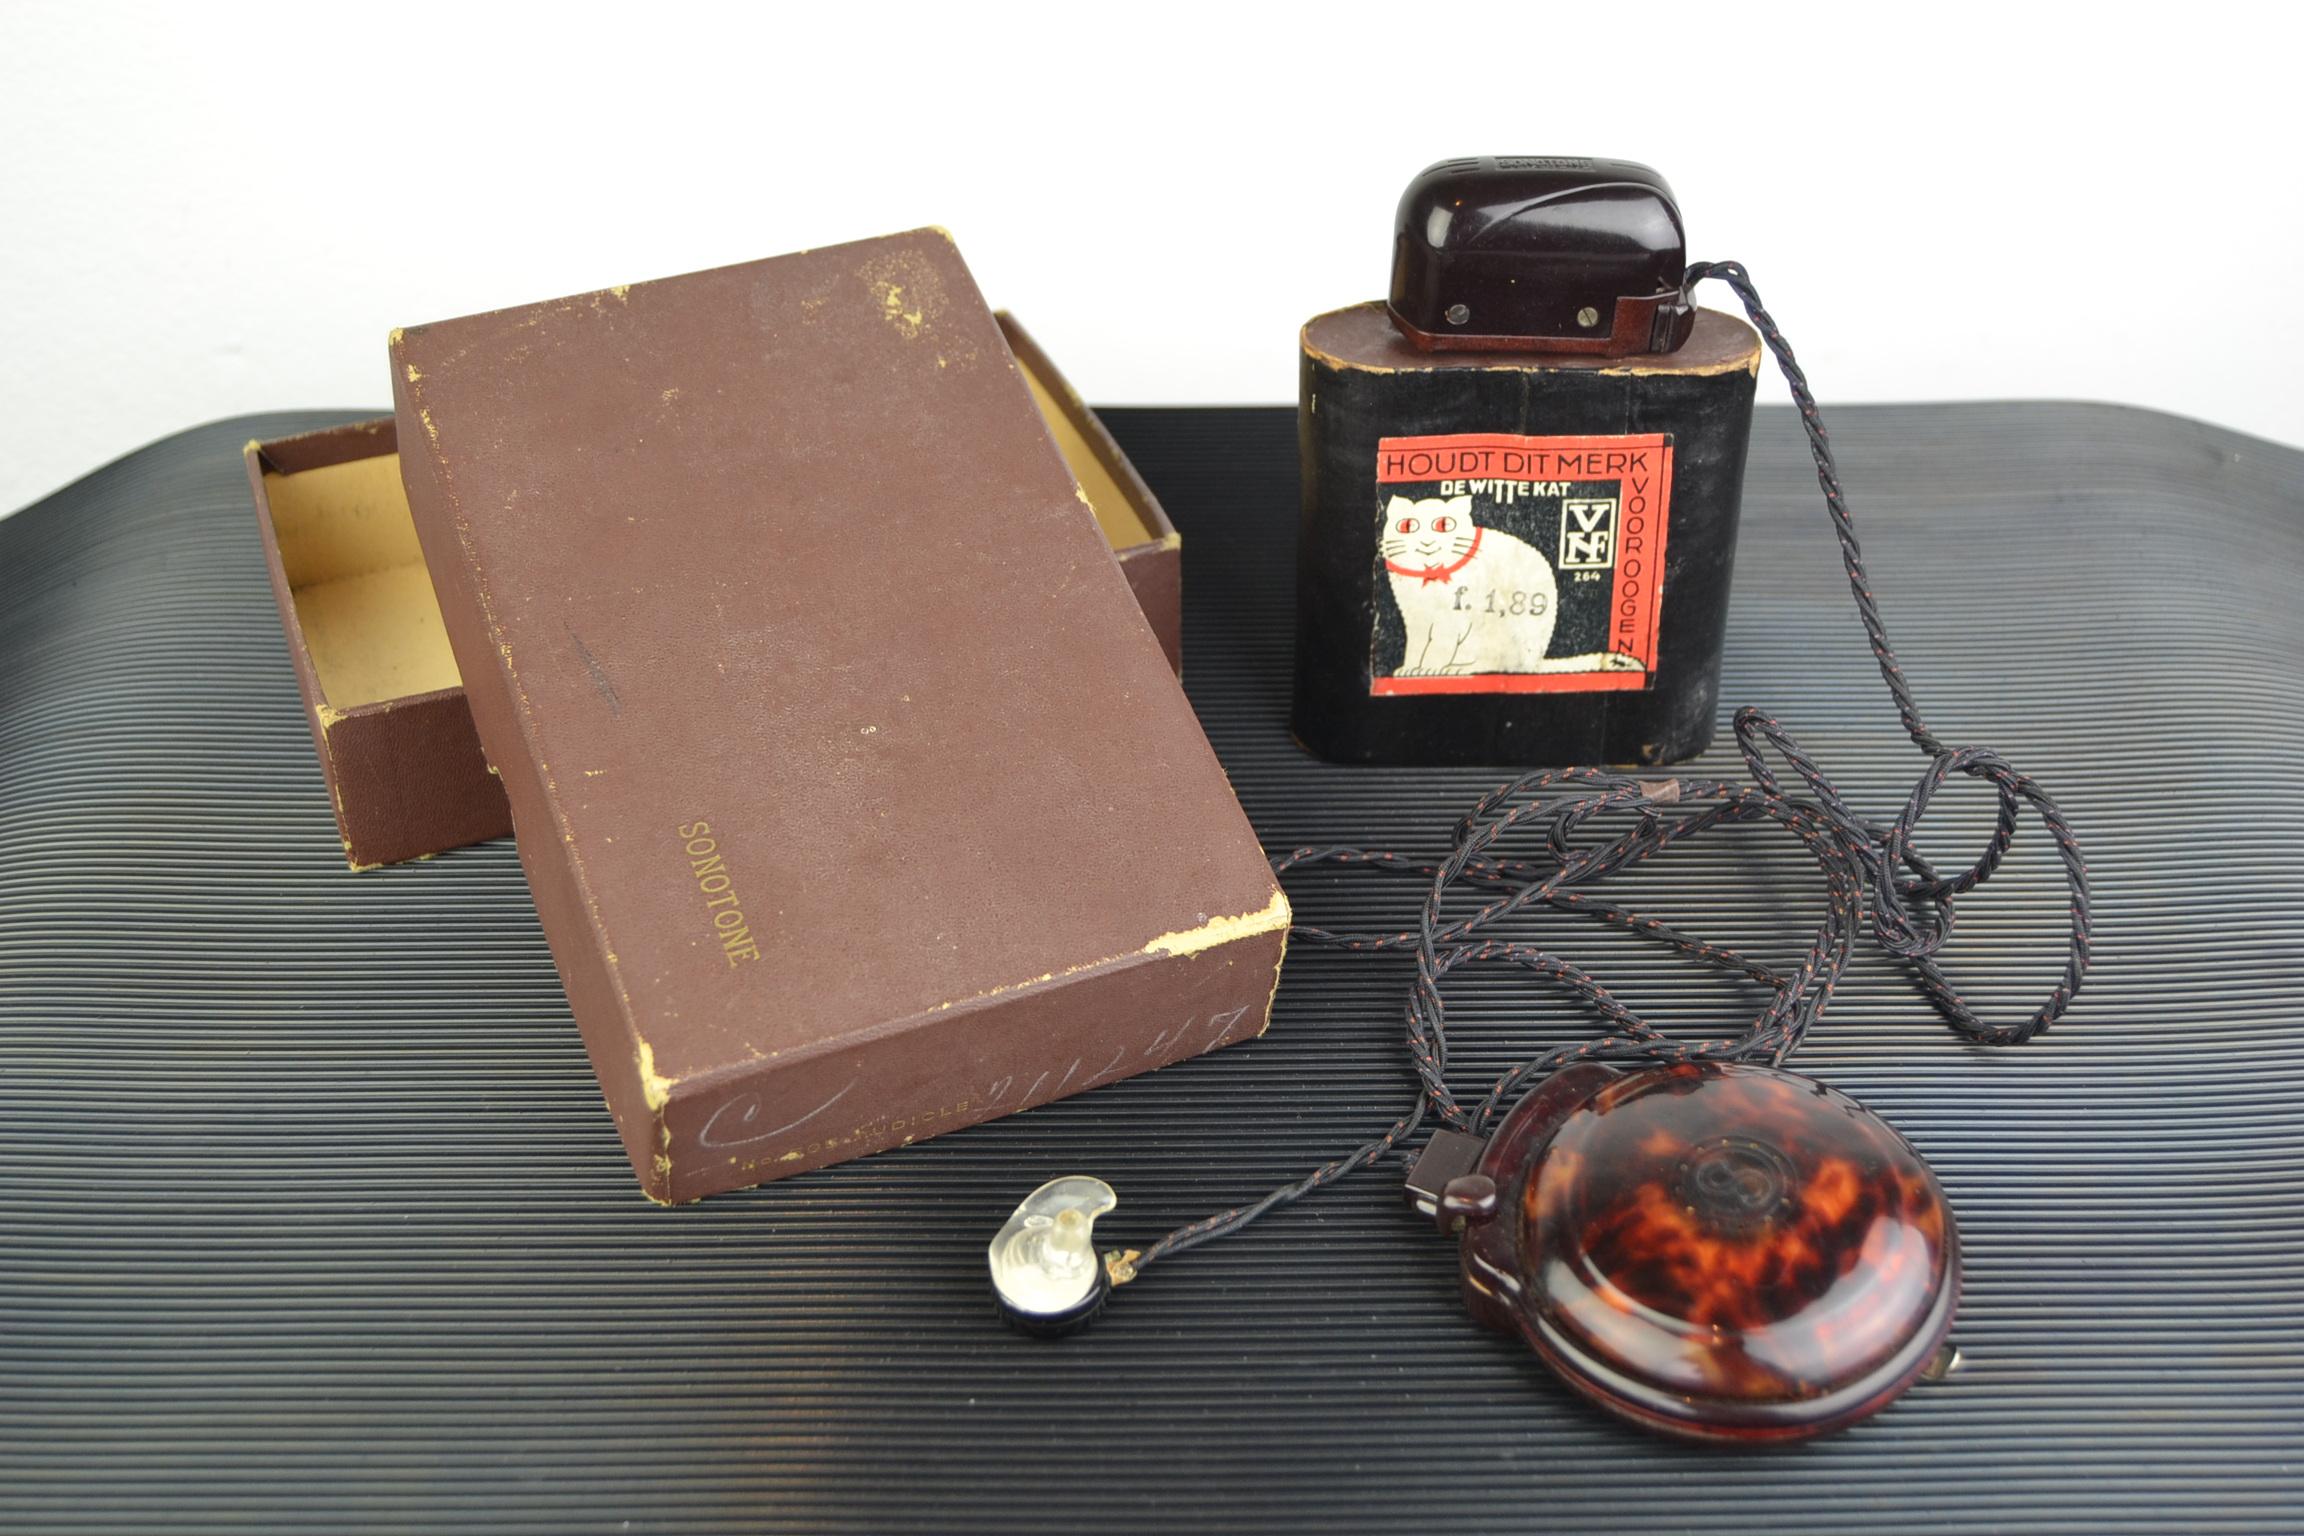 Art Deco bakelite - tortoise celluloid look hearing aid by Sonotone, USA.
This antique medical devise dates circa 1920-1930, comes with his original cardboard Sonotone packing box and with a beautiful old Dutch battery of de Witte Kat - White Cat.